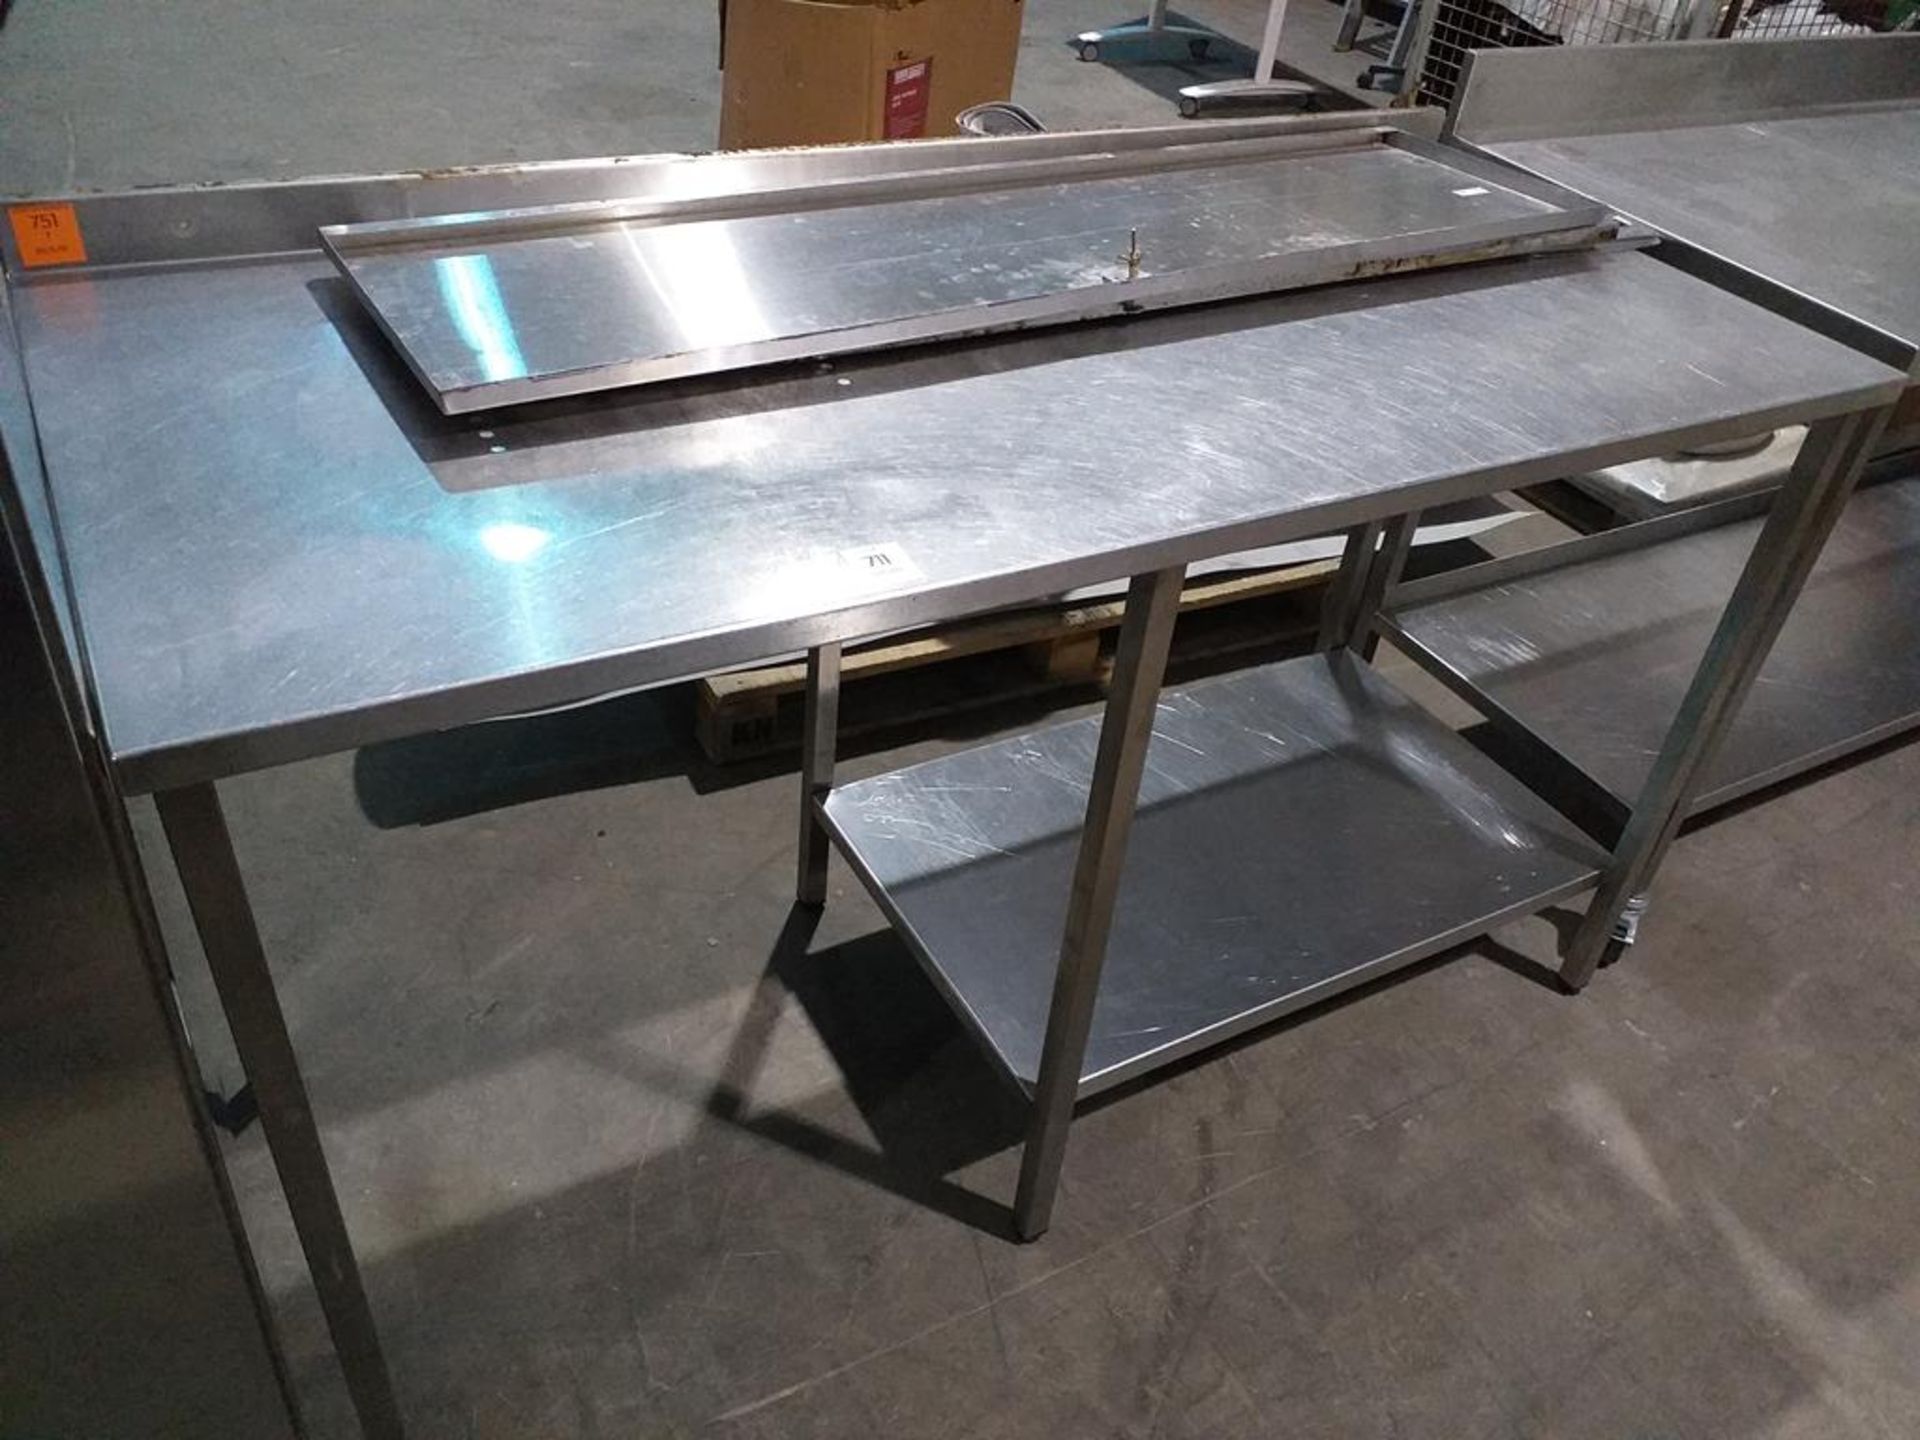 A S/Steel Preparation Table